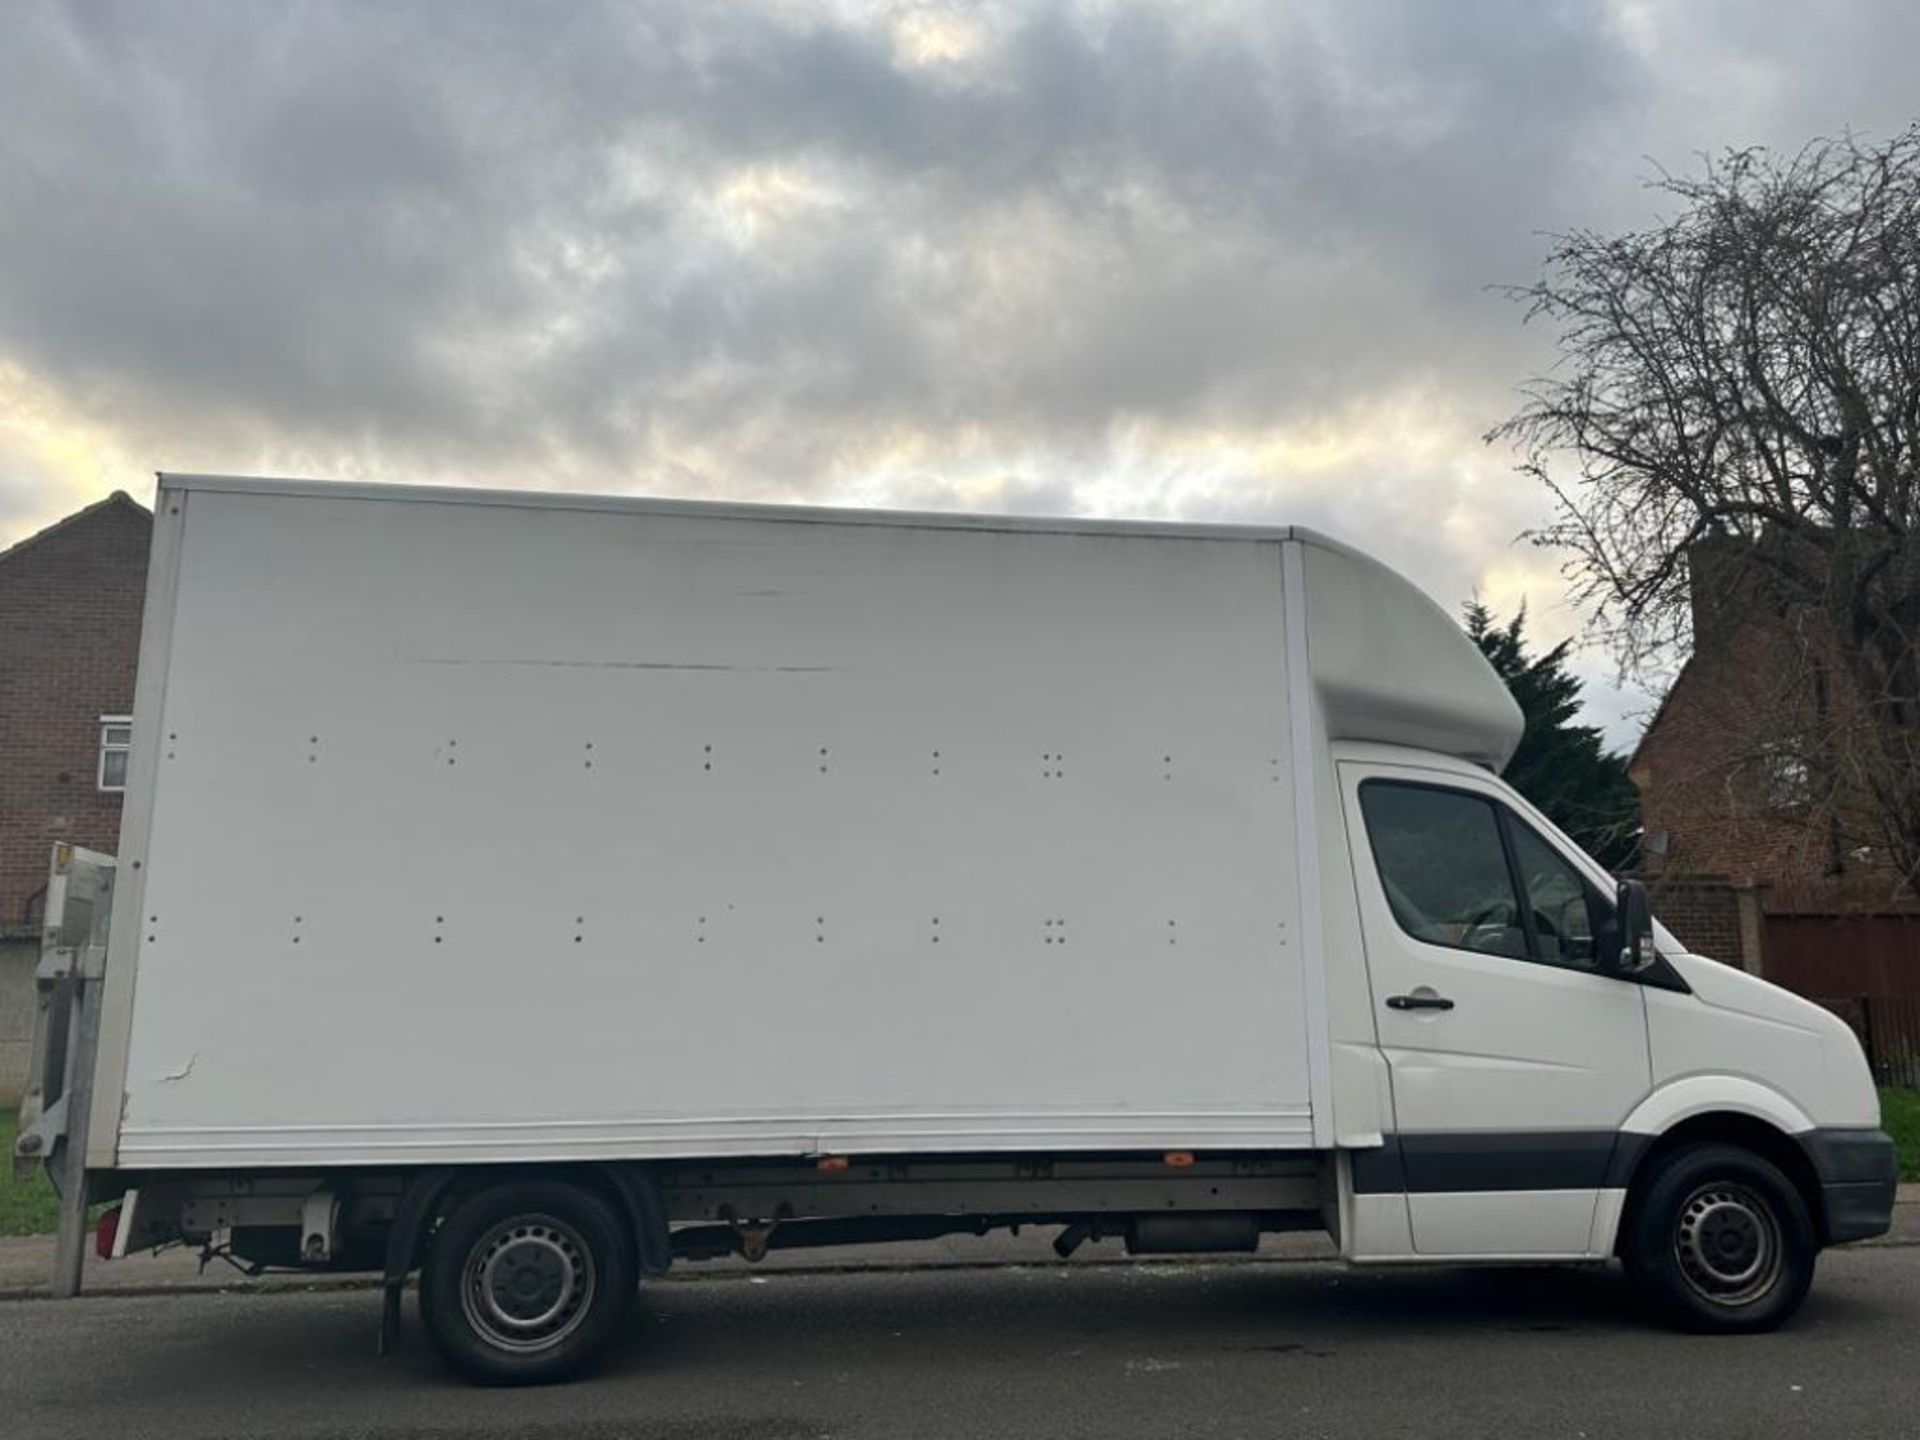 (ON SALE) VOLKSWAGEN CRAFTER 2.0 TDI LWB LUTON WITH ELECTRIC TAIL LIFT - 66 REG (EURO 6) - Image 2 of 9